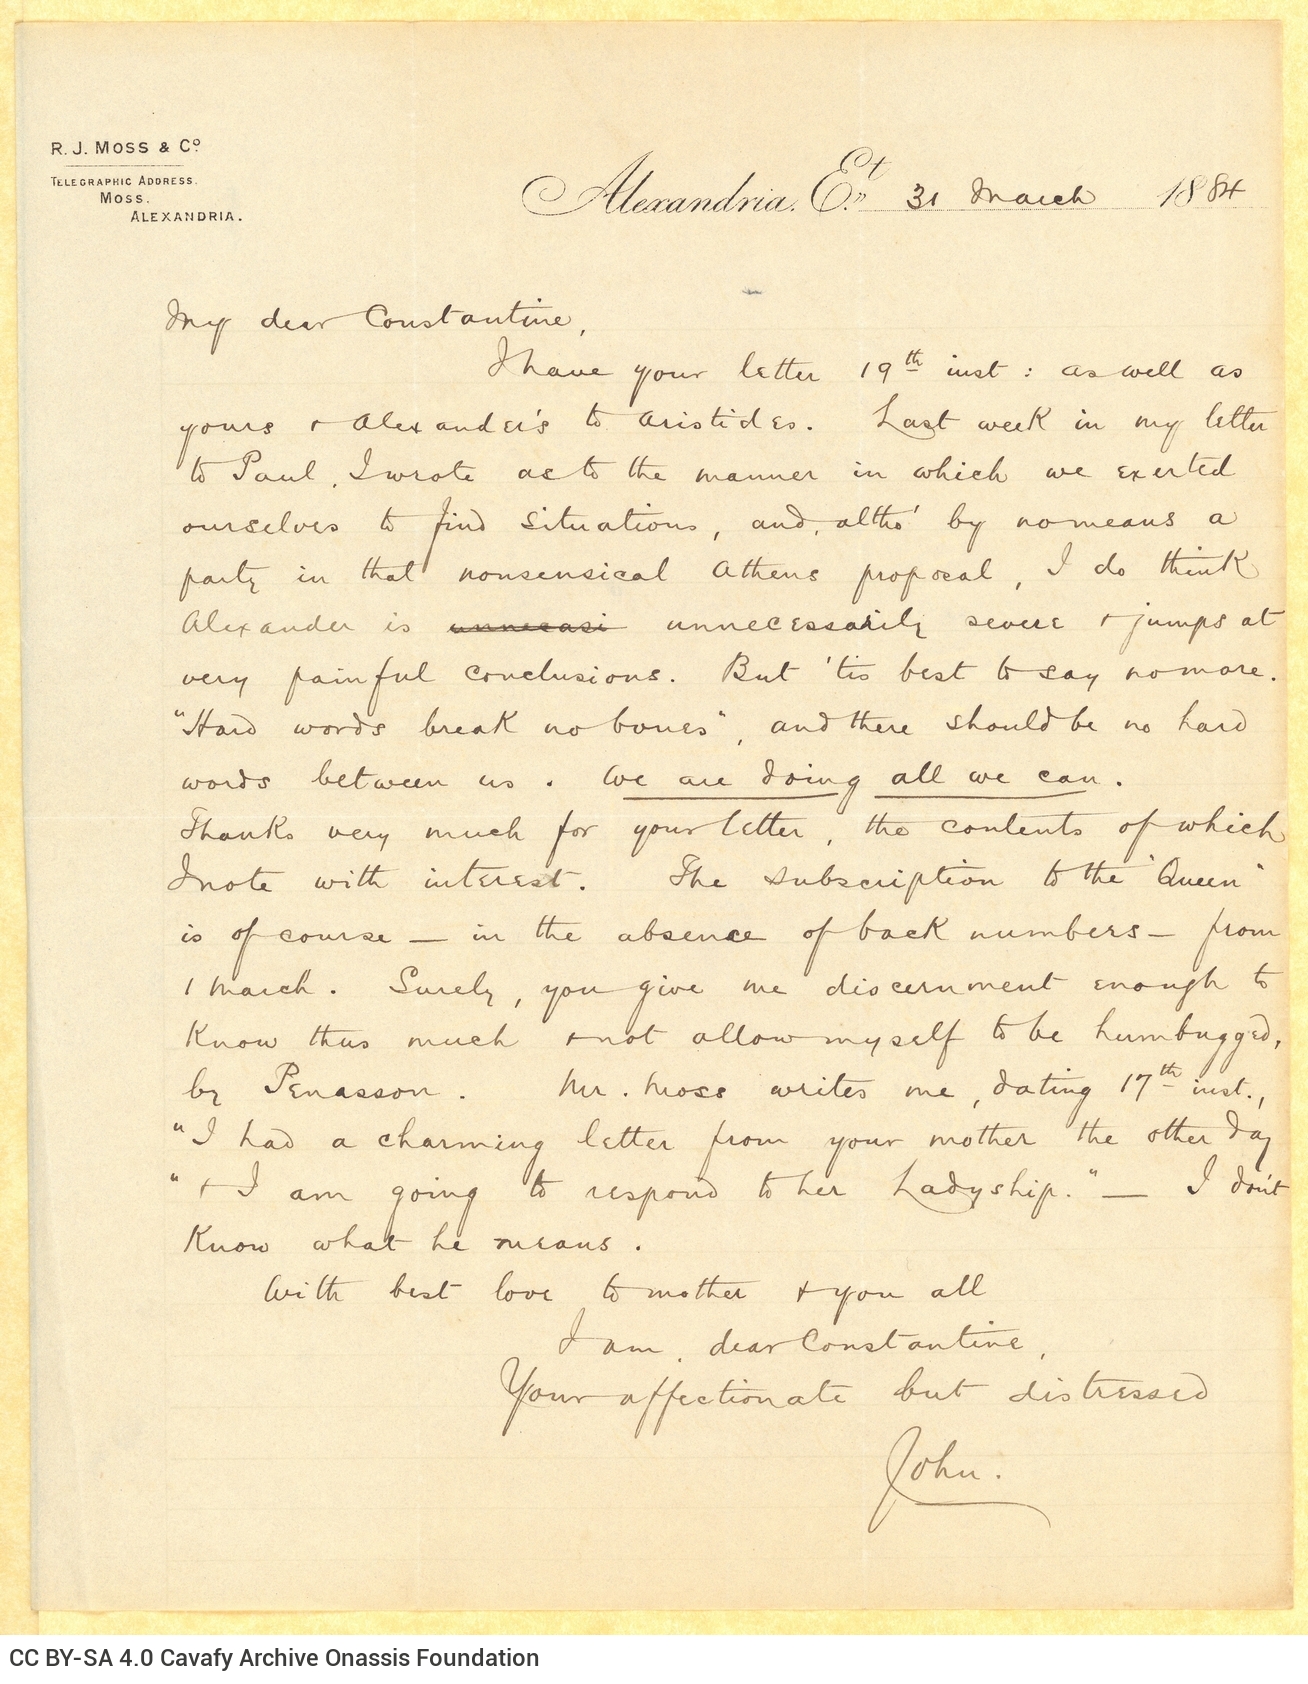 Handwritten letter by John Cavafy to C. P. Cavafy, on the first page of a double sheet letterhead of R. J. Moss & Co., Alexan